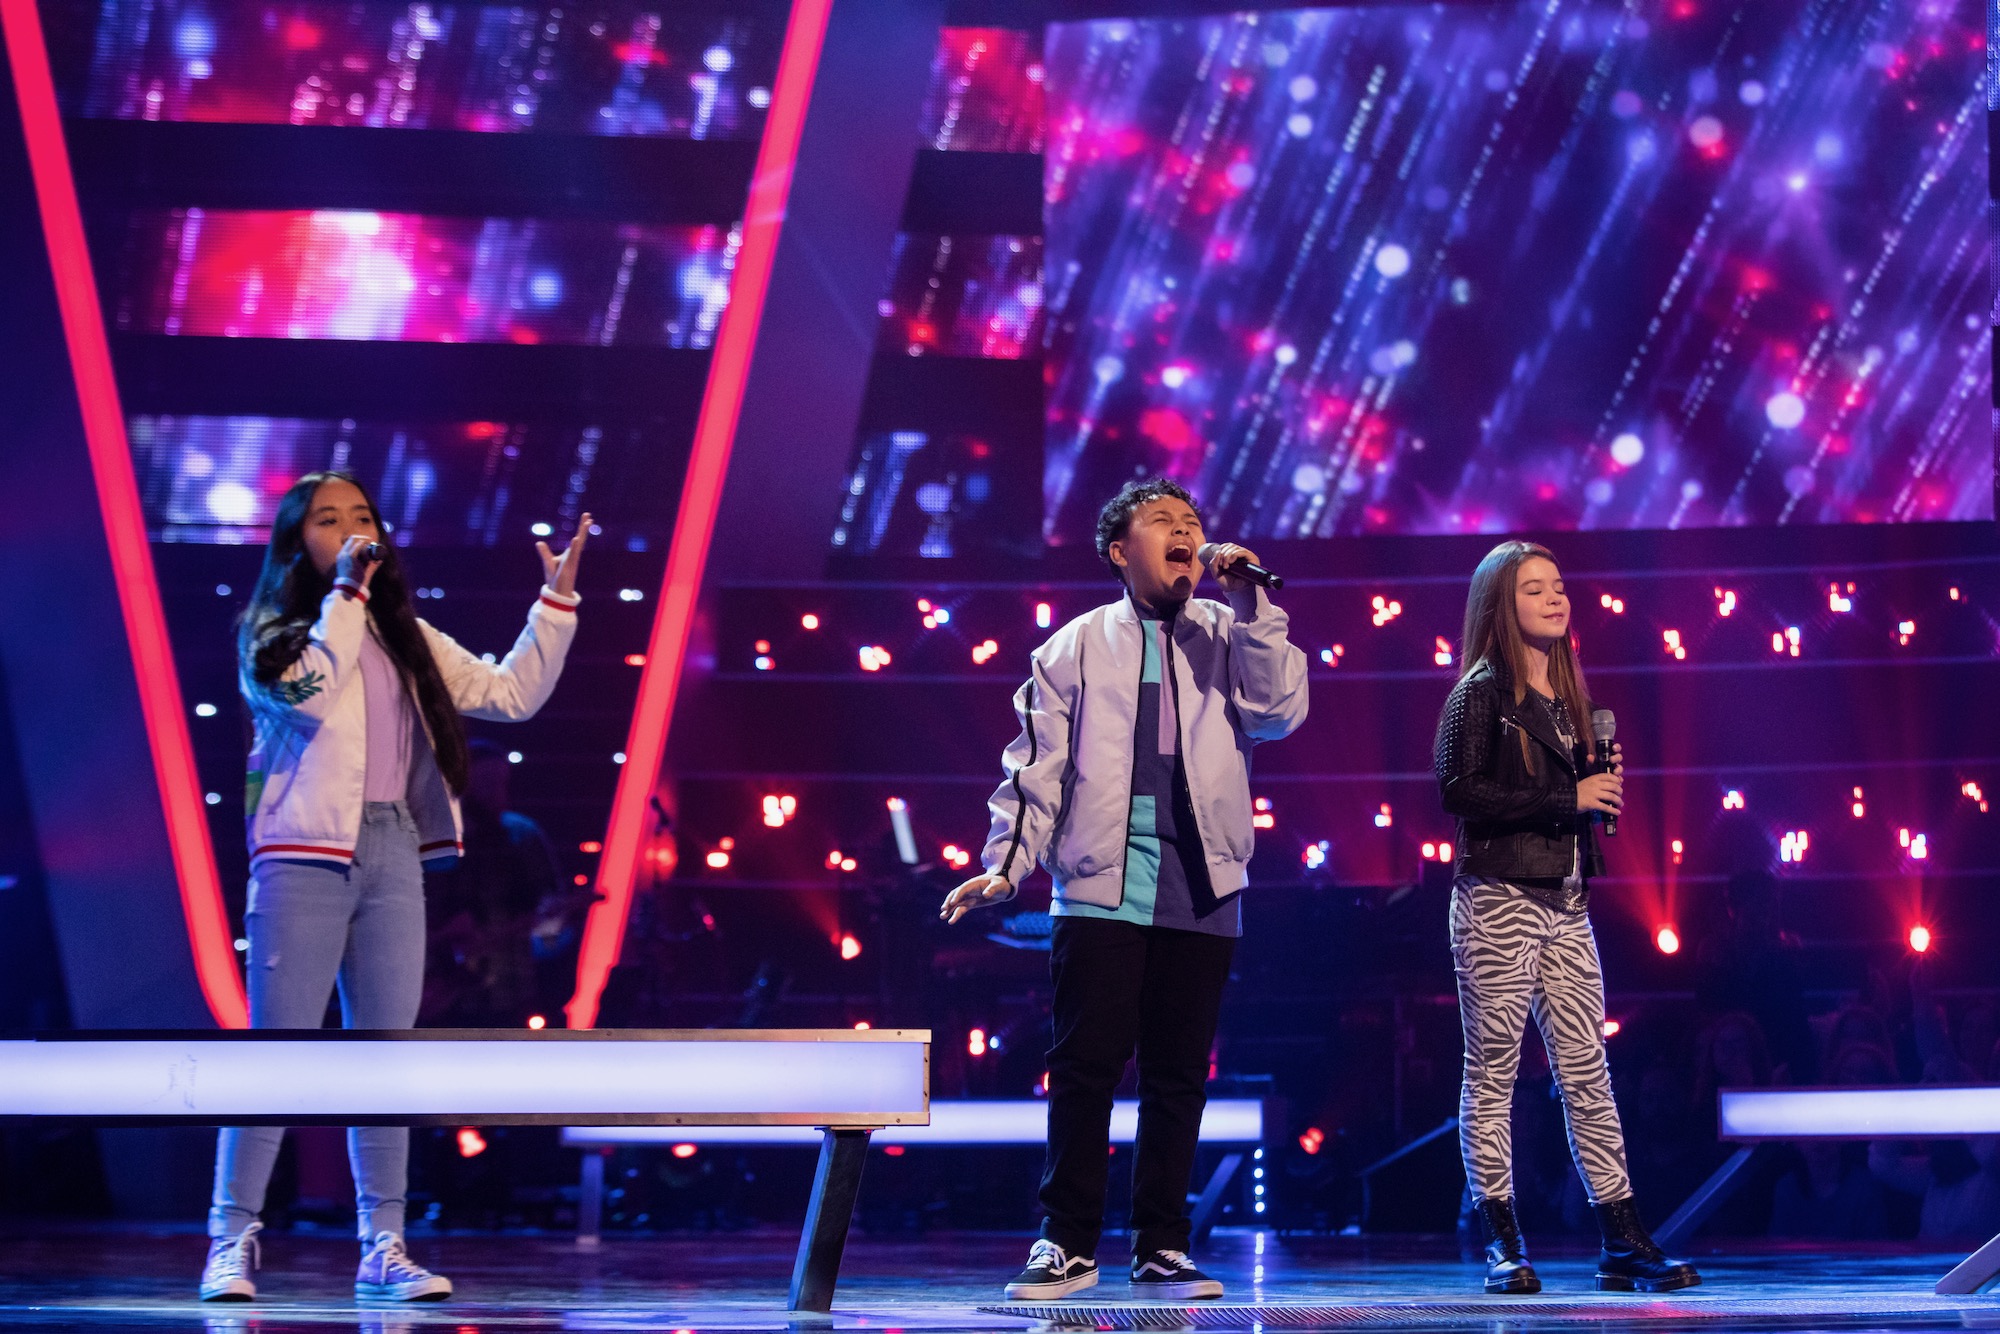 Watch The Voice Kids epic battle performance of 'Rise Up' by Justine